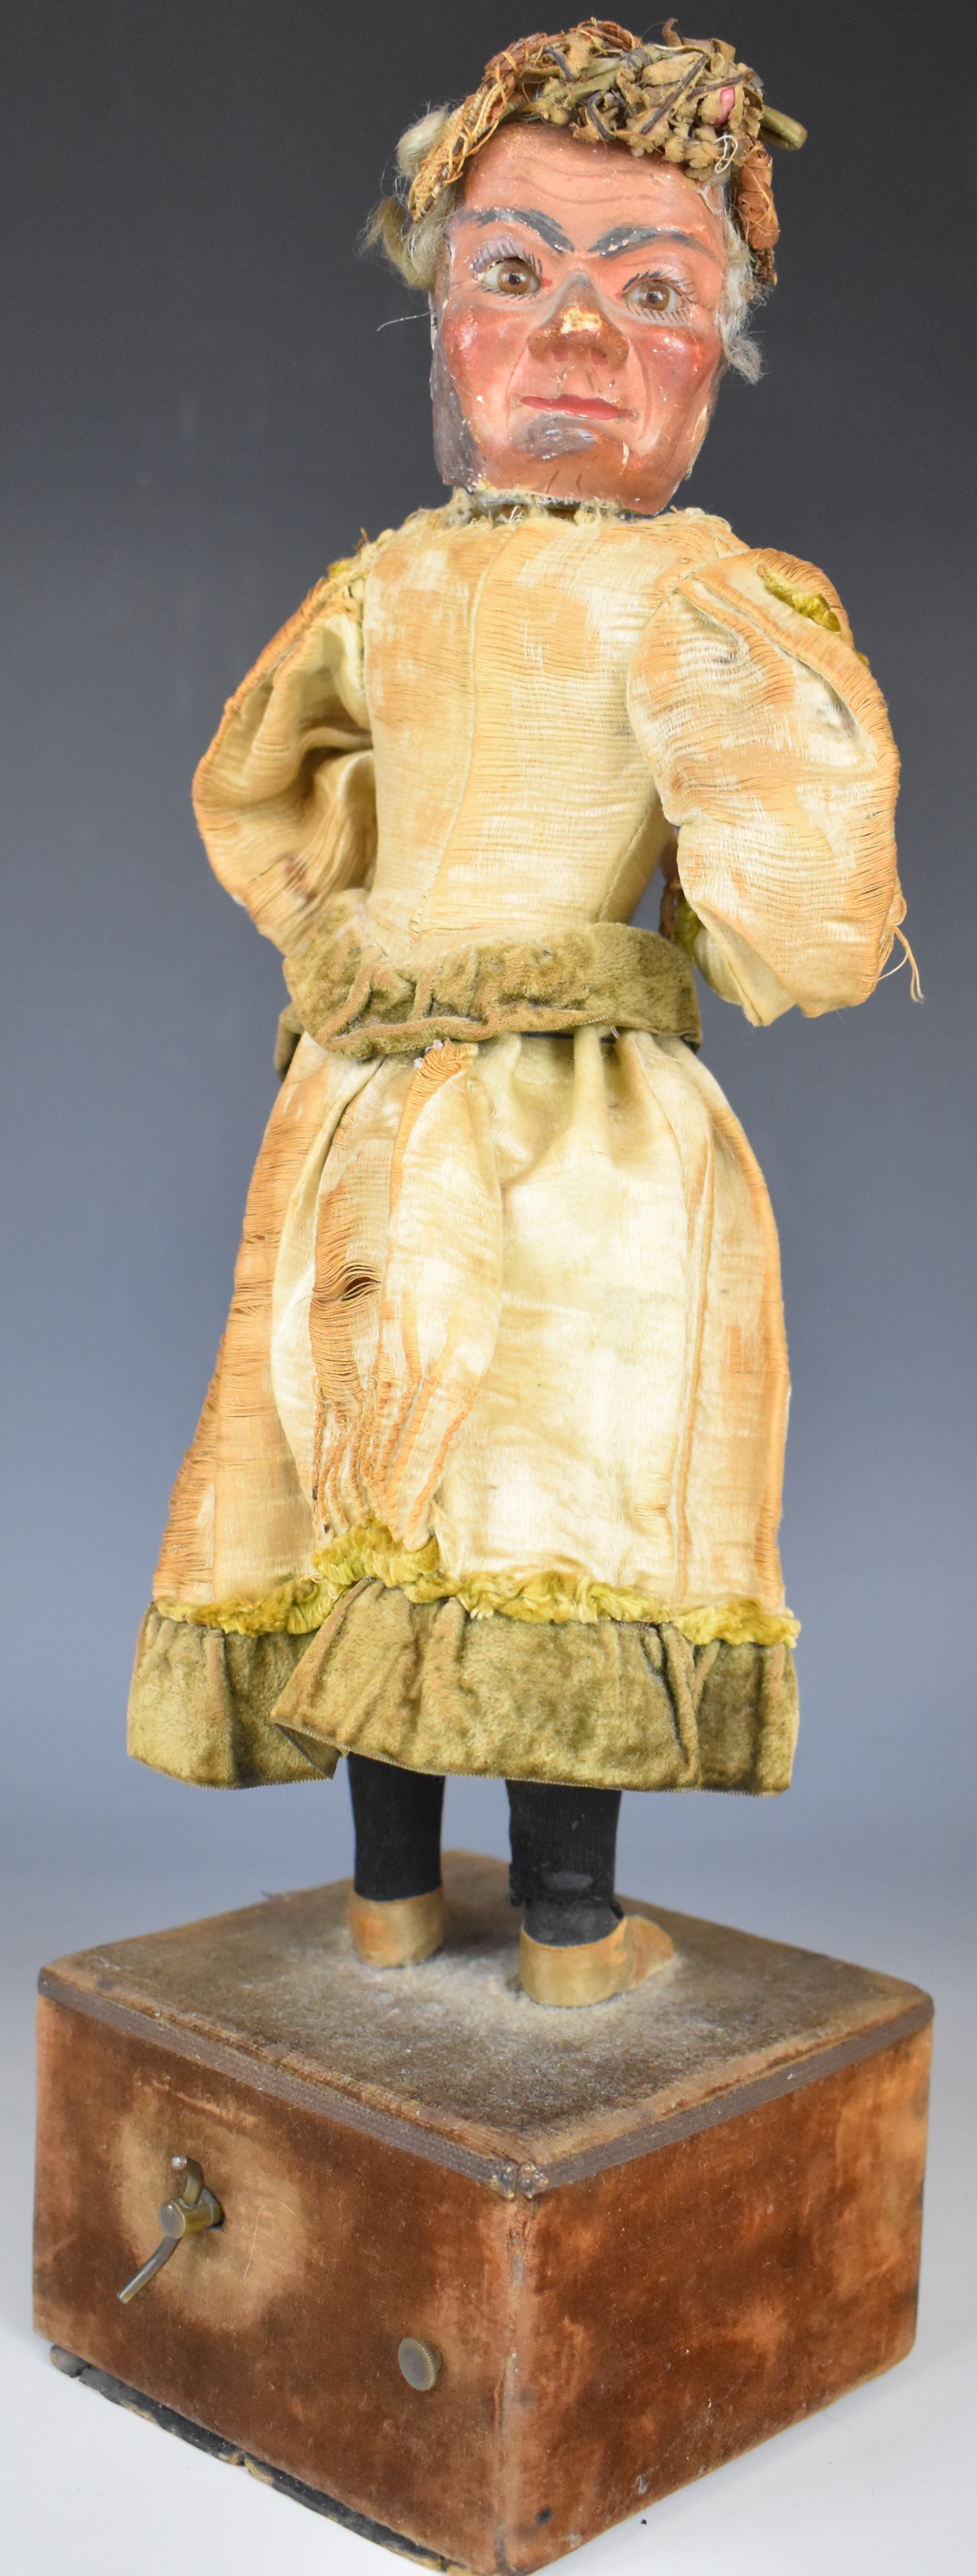 19th century likely French Renou automaton model of a doll, with bisque or similar face and lower - Image 3 of 12